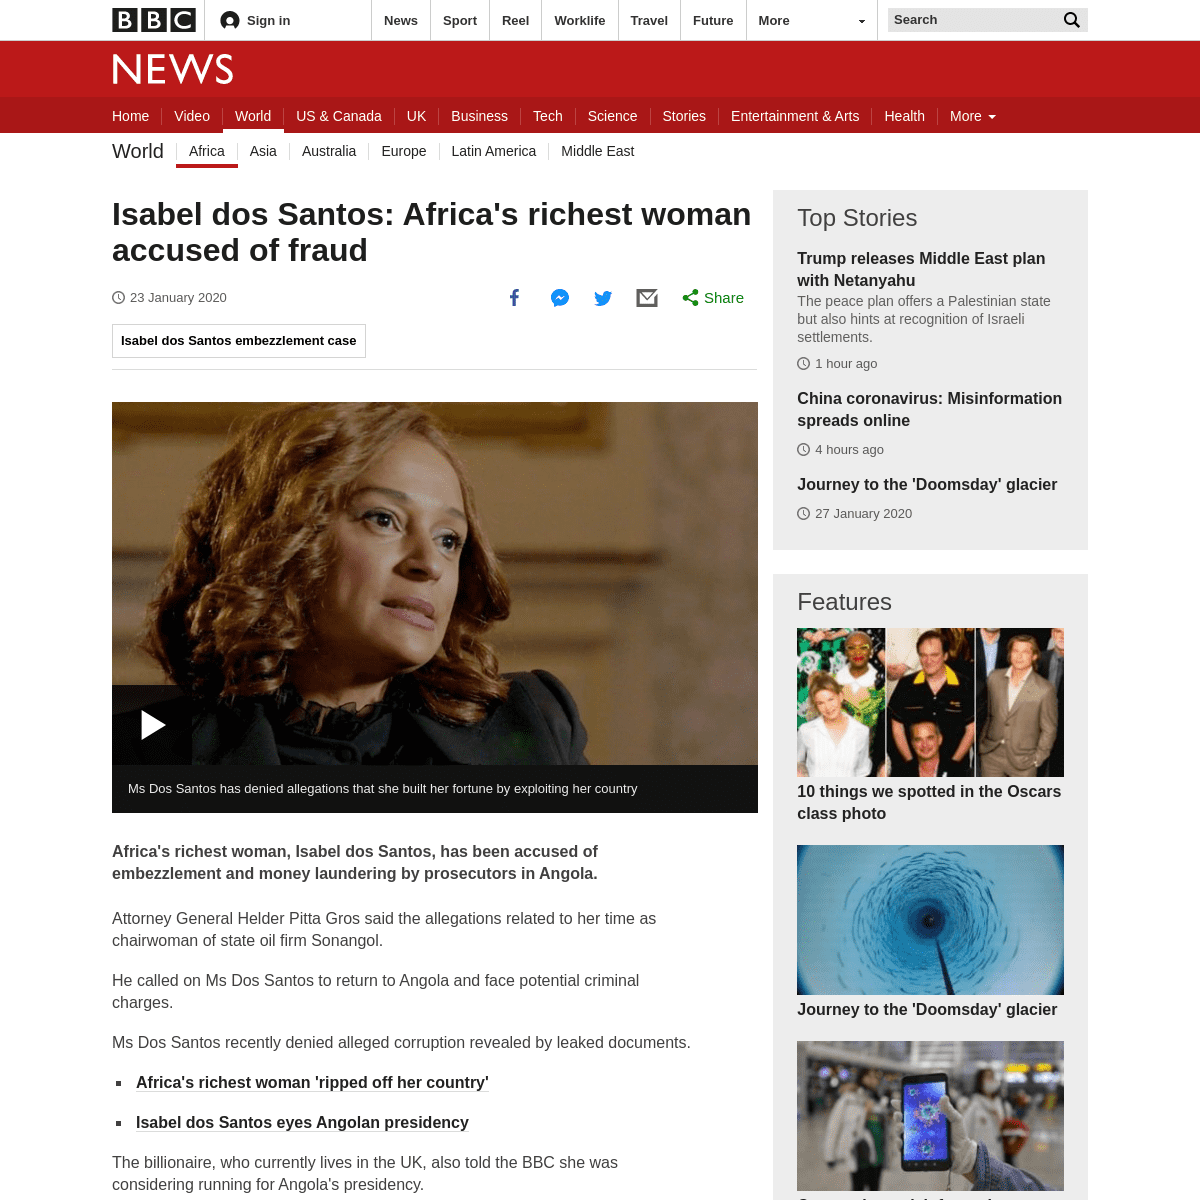 A complete backup of www.bbc.com/news/world-africa-51218501